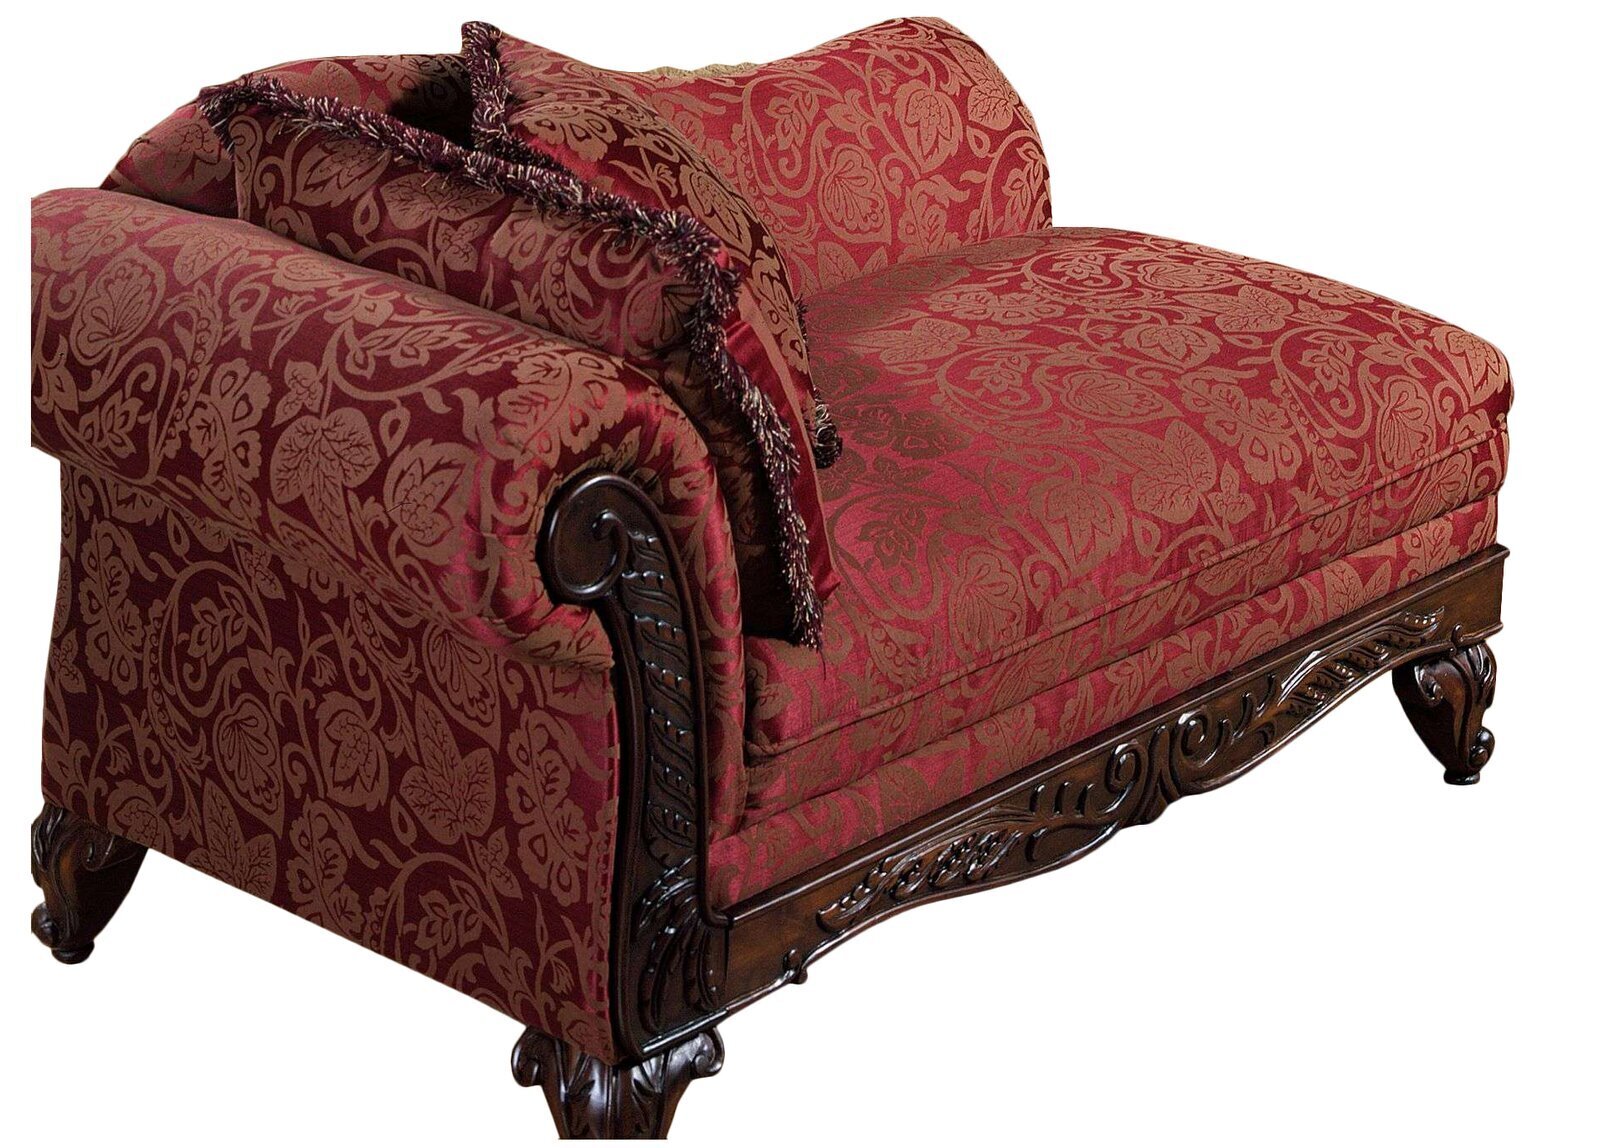 Classic Rolled Arm Bedroom Chaise Lounge